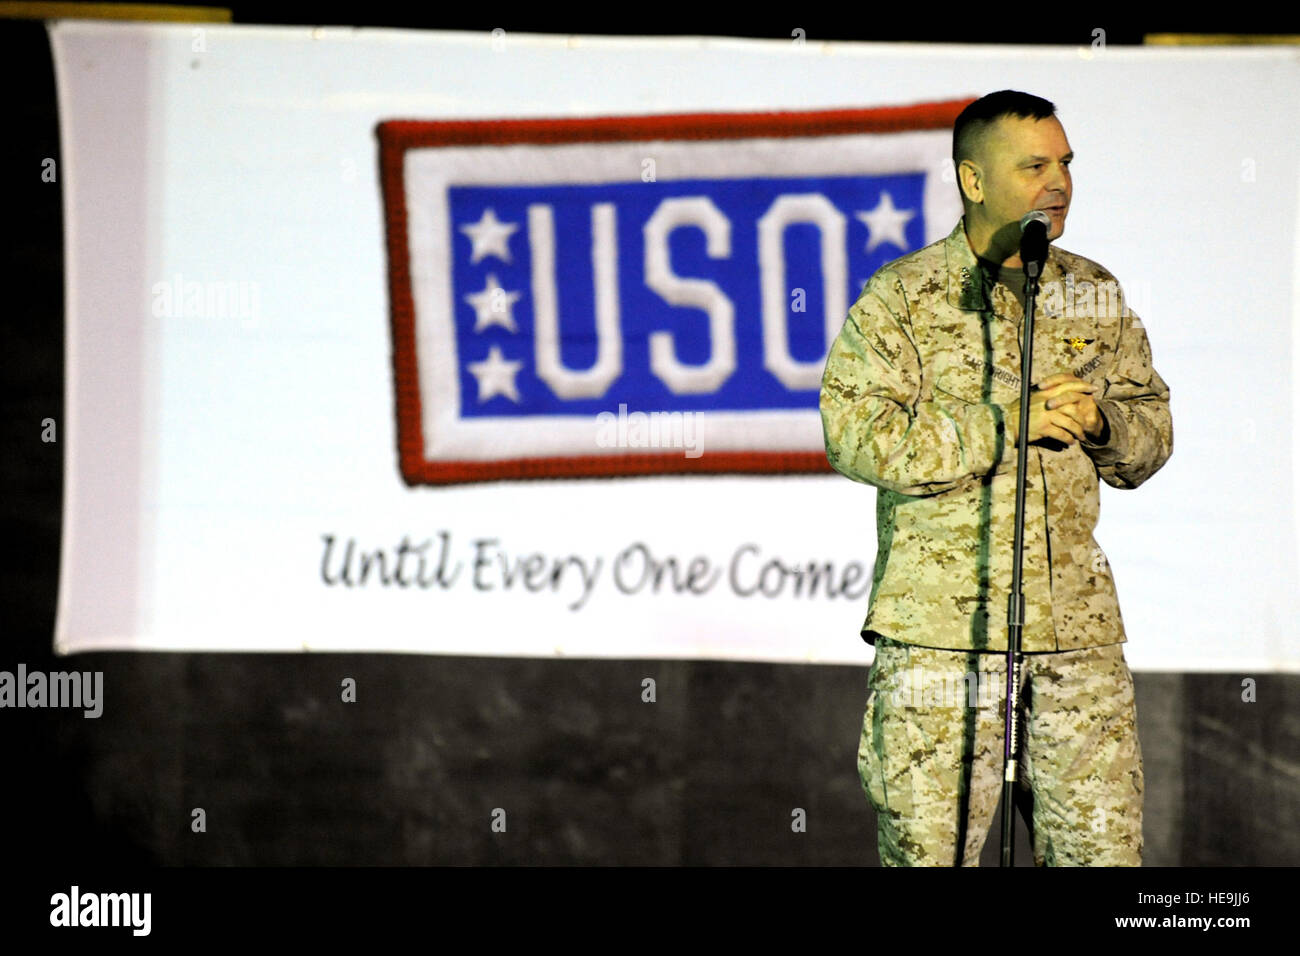 Vice Chairman of the Joint Chiefs of Staff U.S. Marine Gen. James E. Cartwright addresses the crowd during a USO show at Camp Liberty, Iraq, Nov. 14, 2008. Cartwright was on the fifth leg of a trip, which had included Greenland, Alaska, Korea and Afghanistan.  Air Force Master Sgt. Adam M. Stump. (Released) Stock Photo